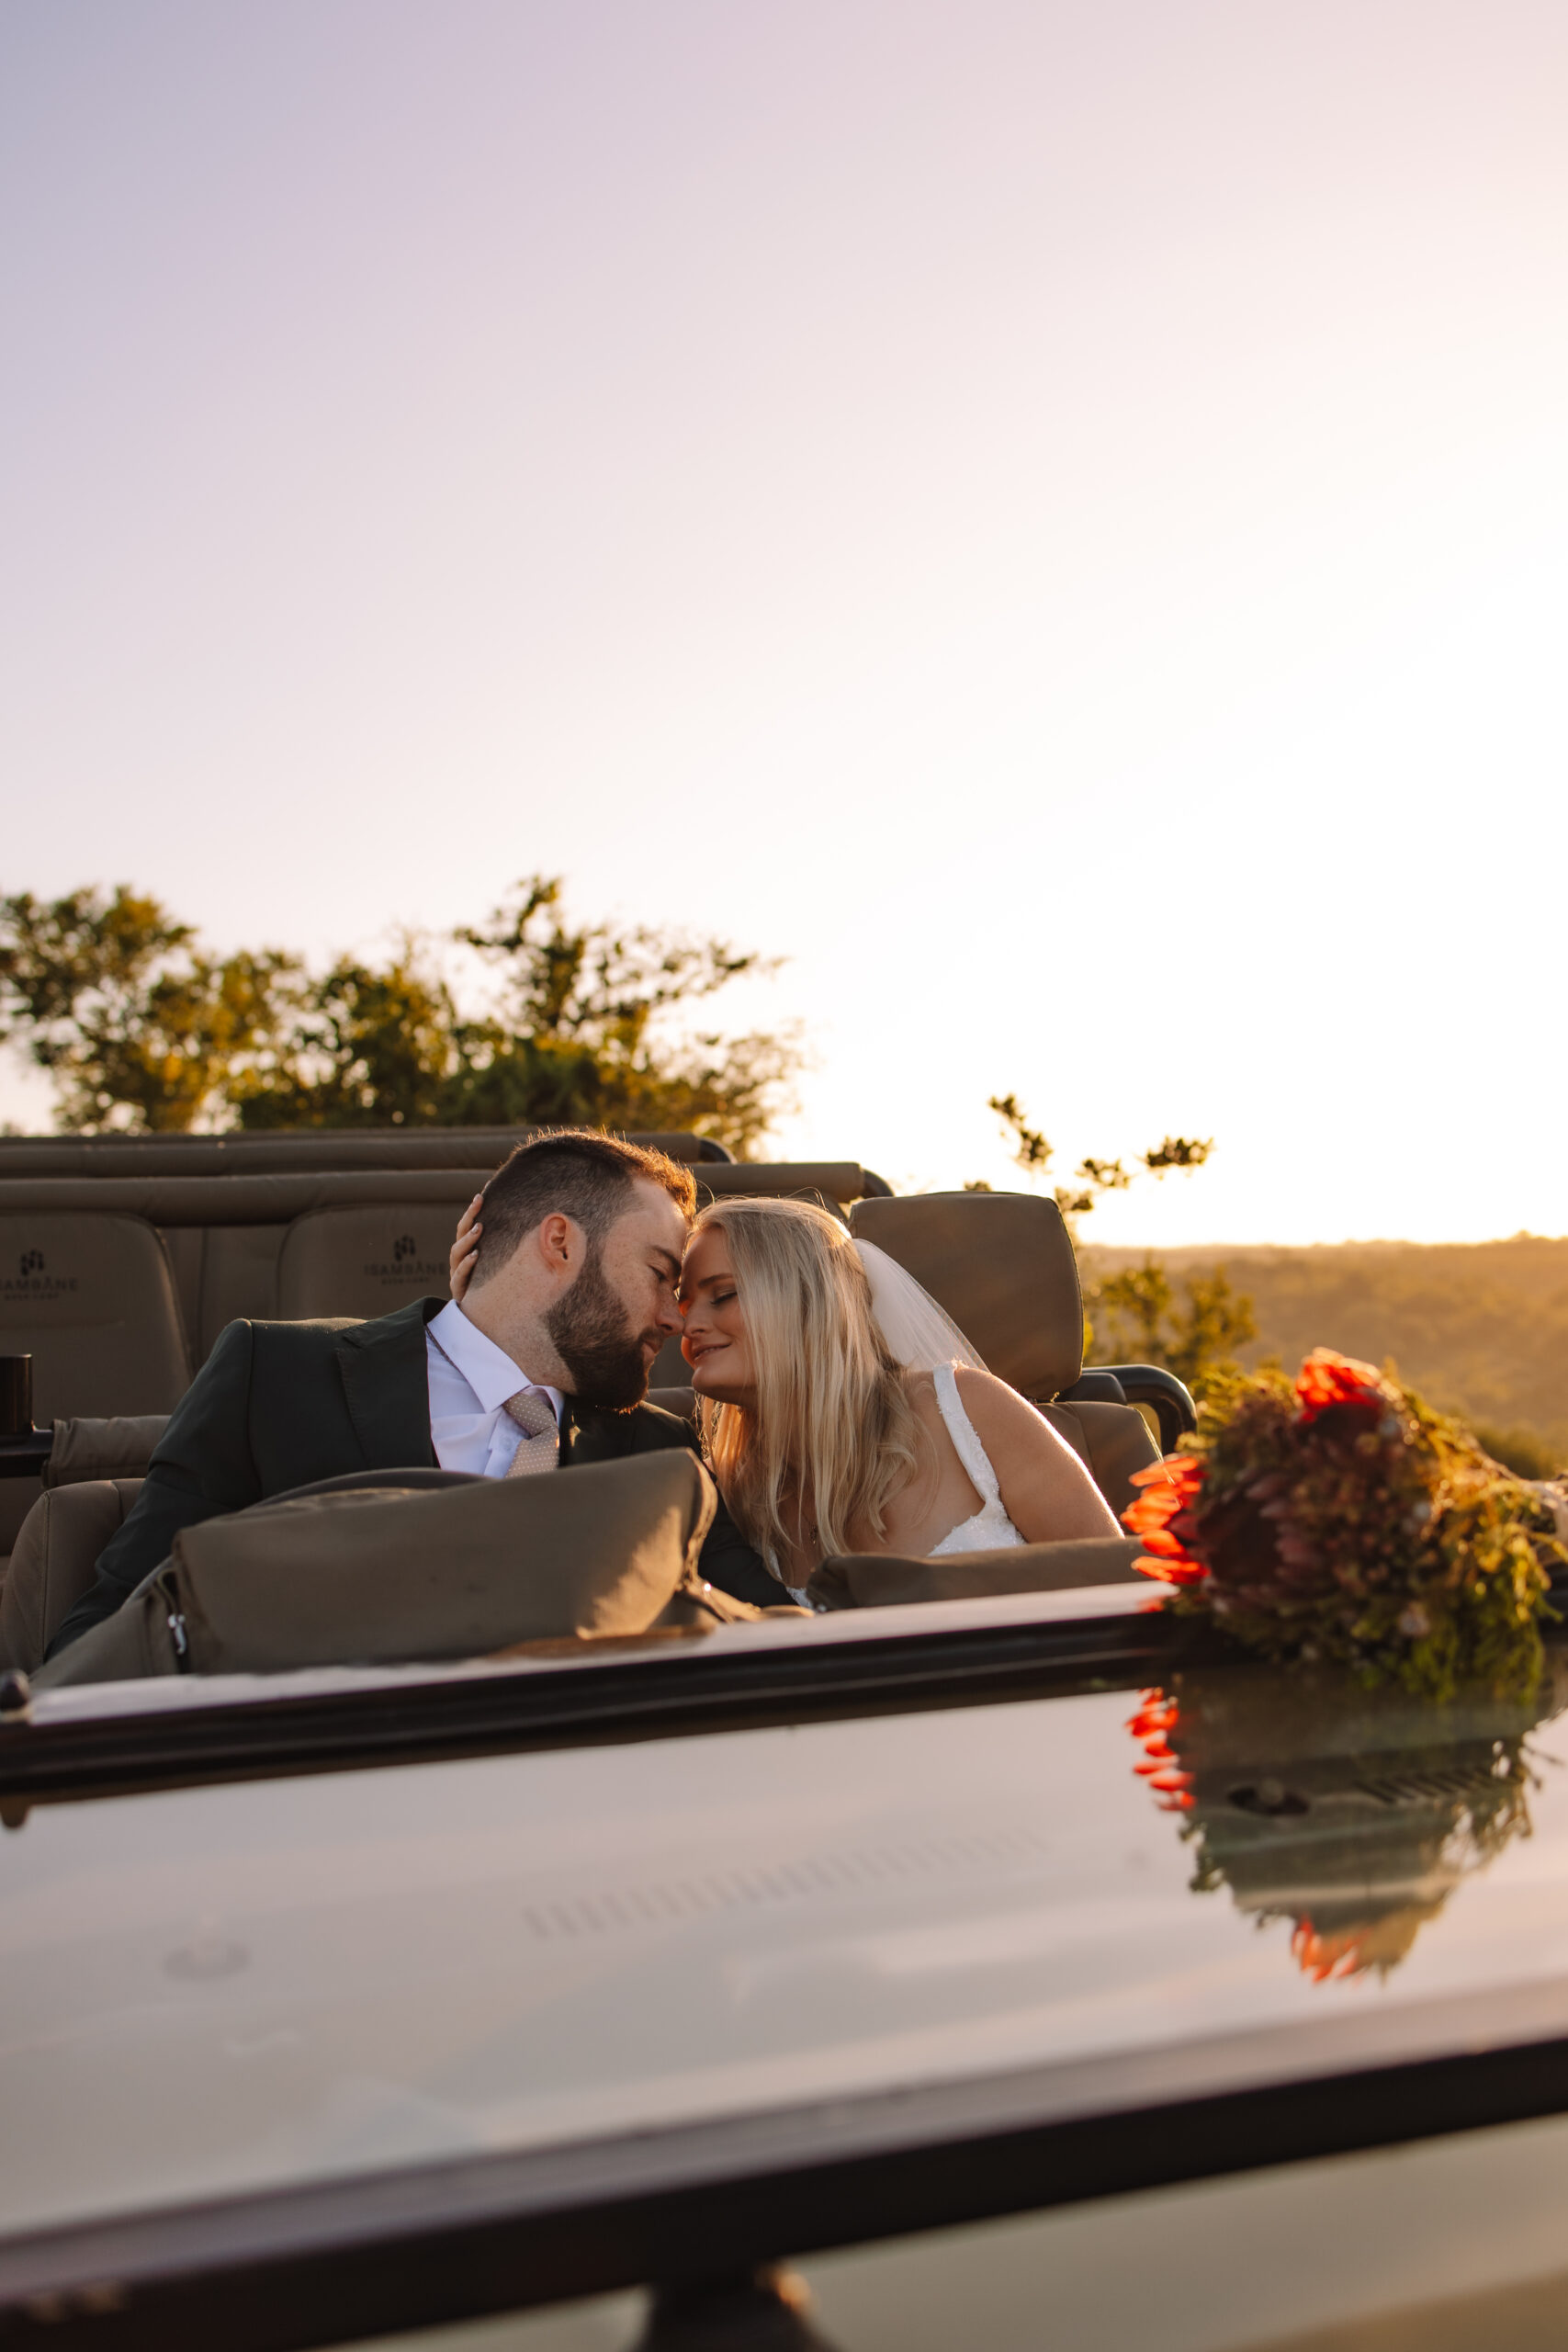 Destination wedding couple sitting together in the safari vehicle with a protea bouquet leaning on the dashboard